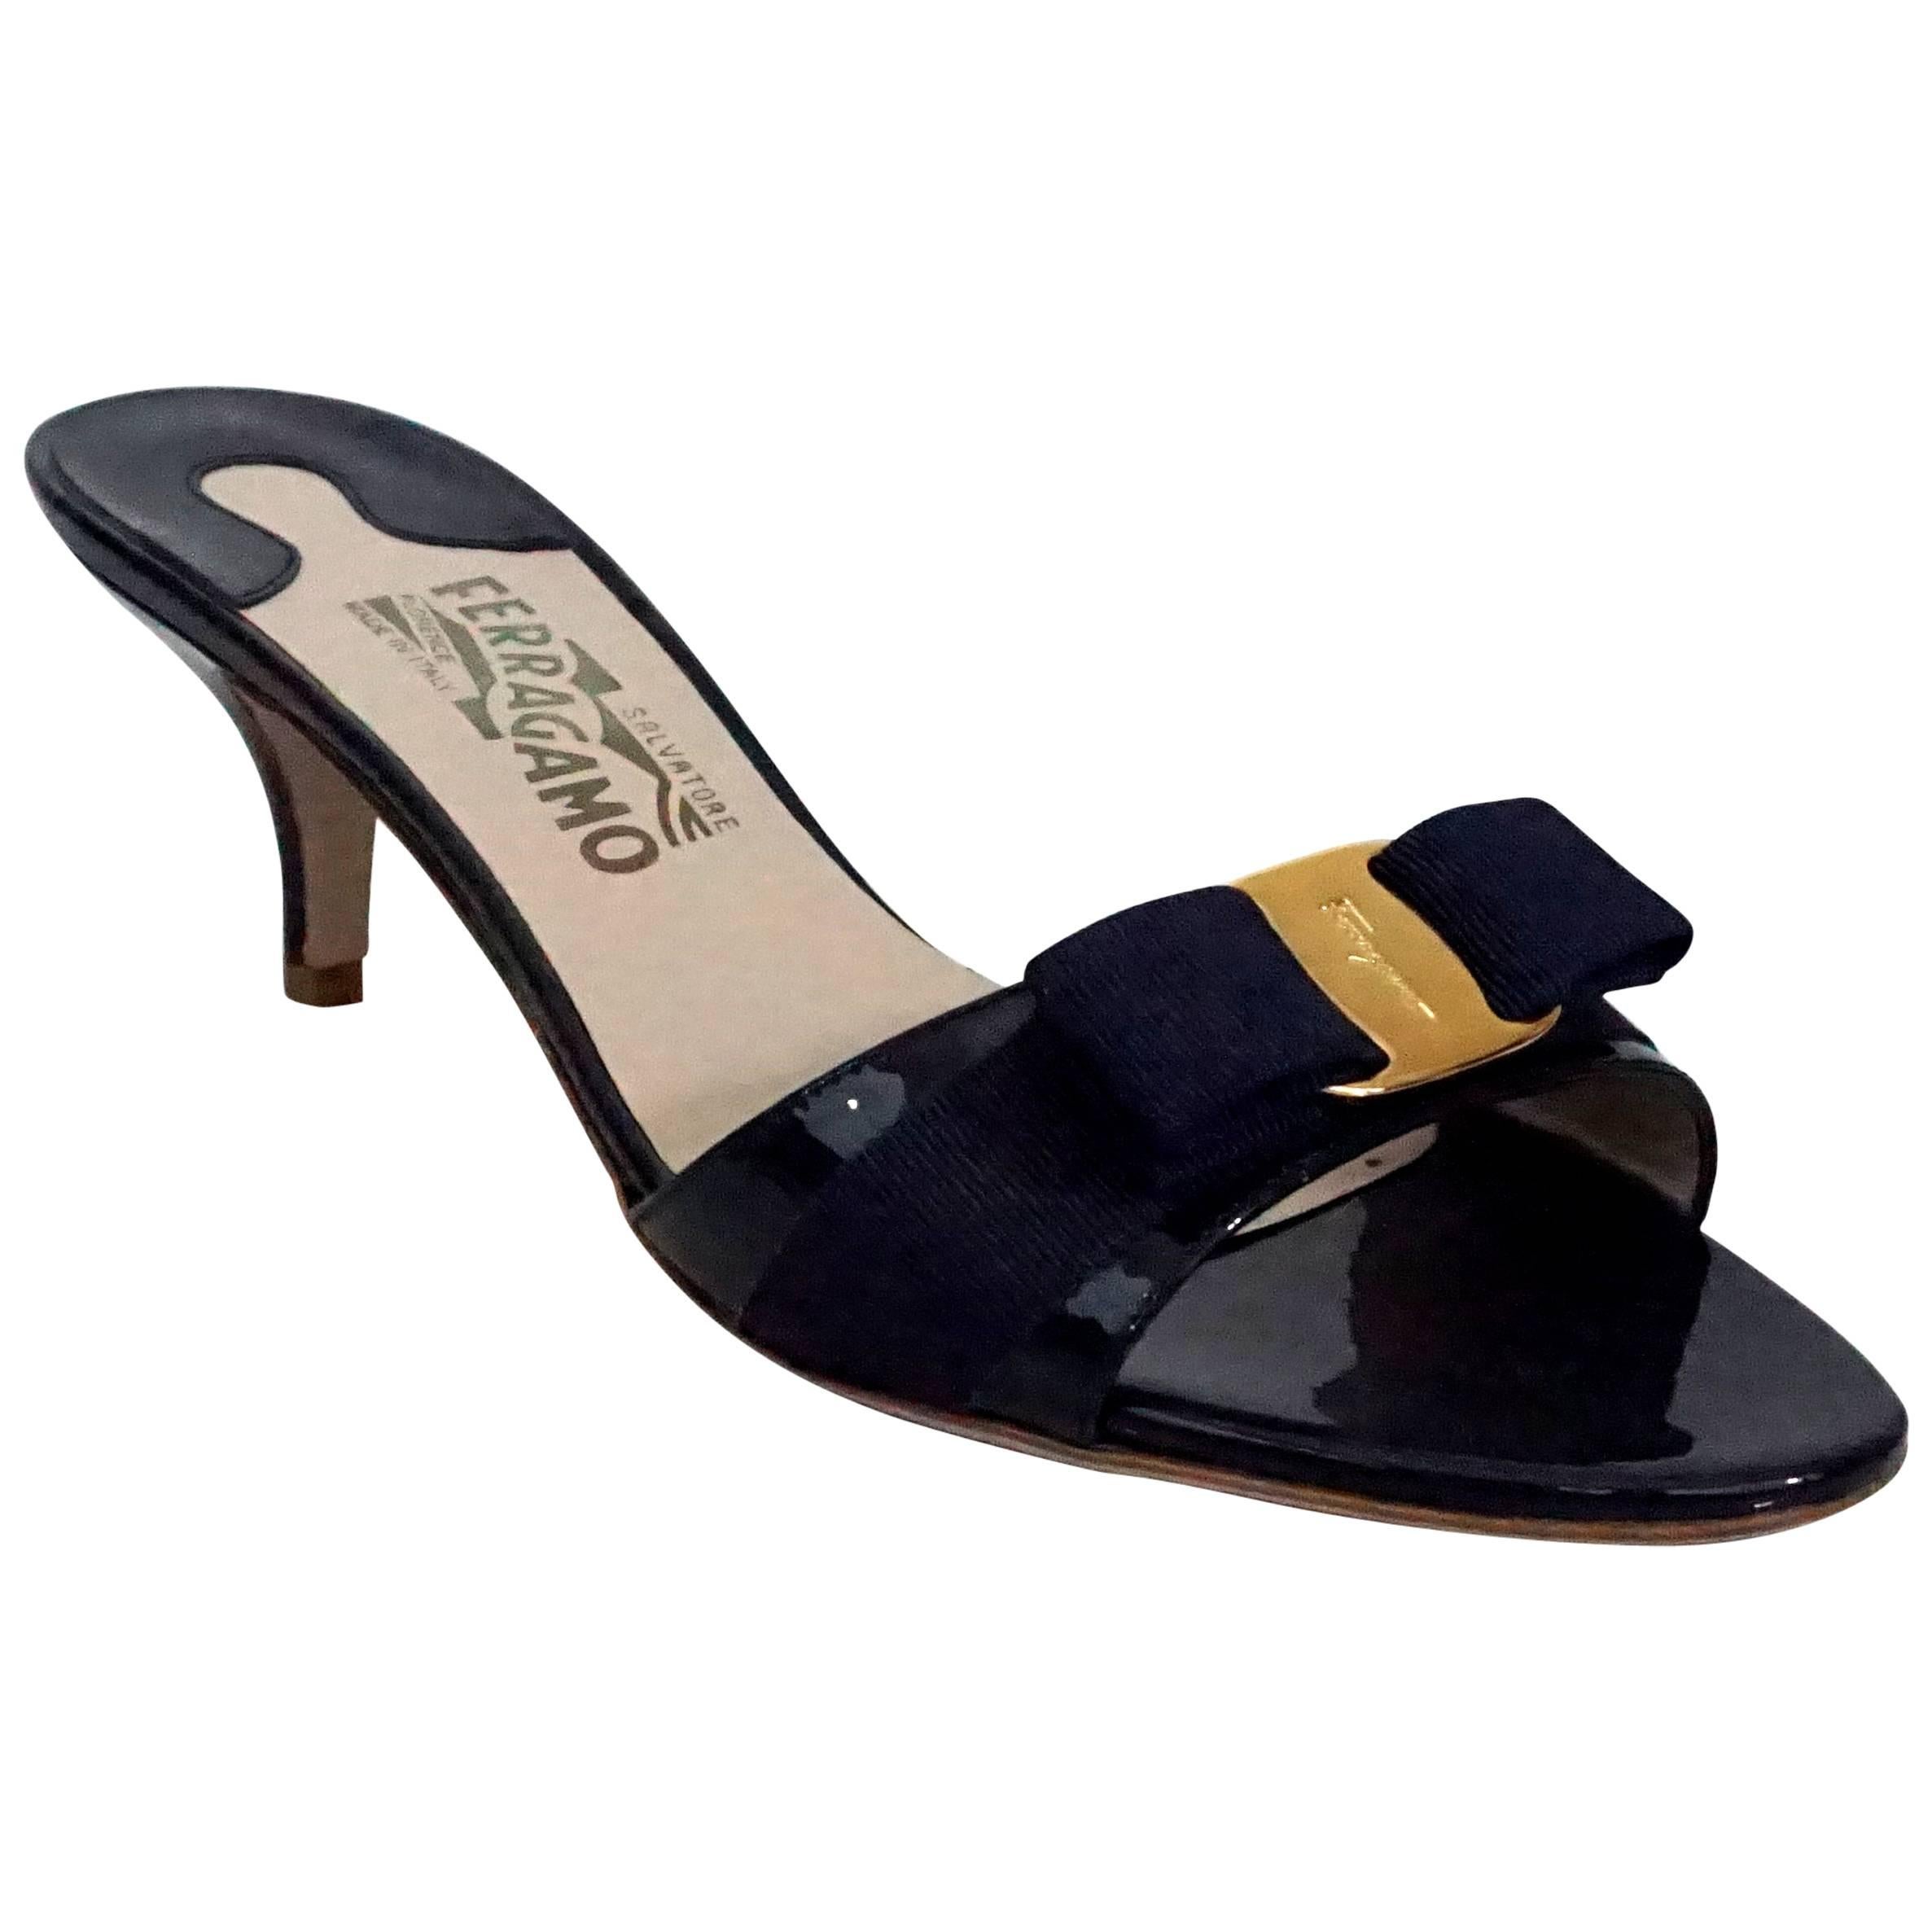 Salvatore Ferragamo Navy Patent Slides with Bow and Gold Logo - 9